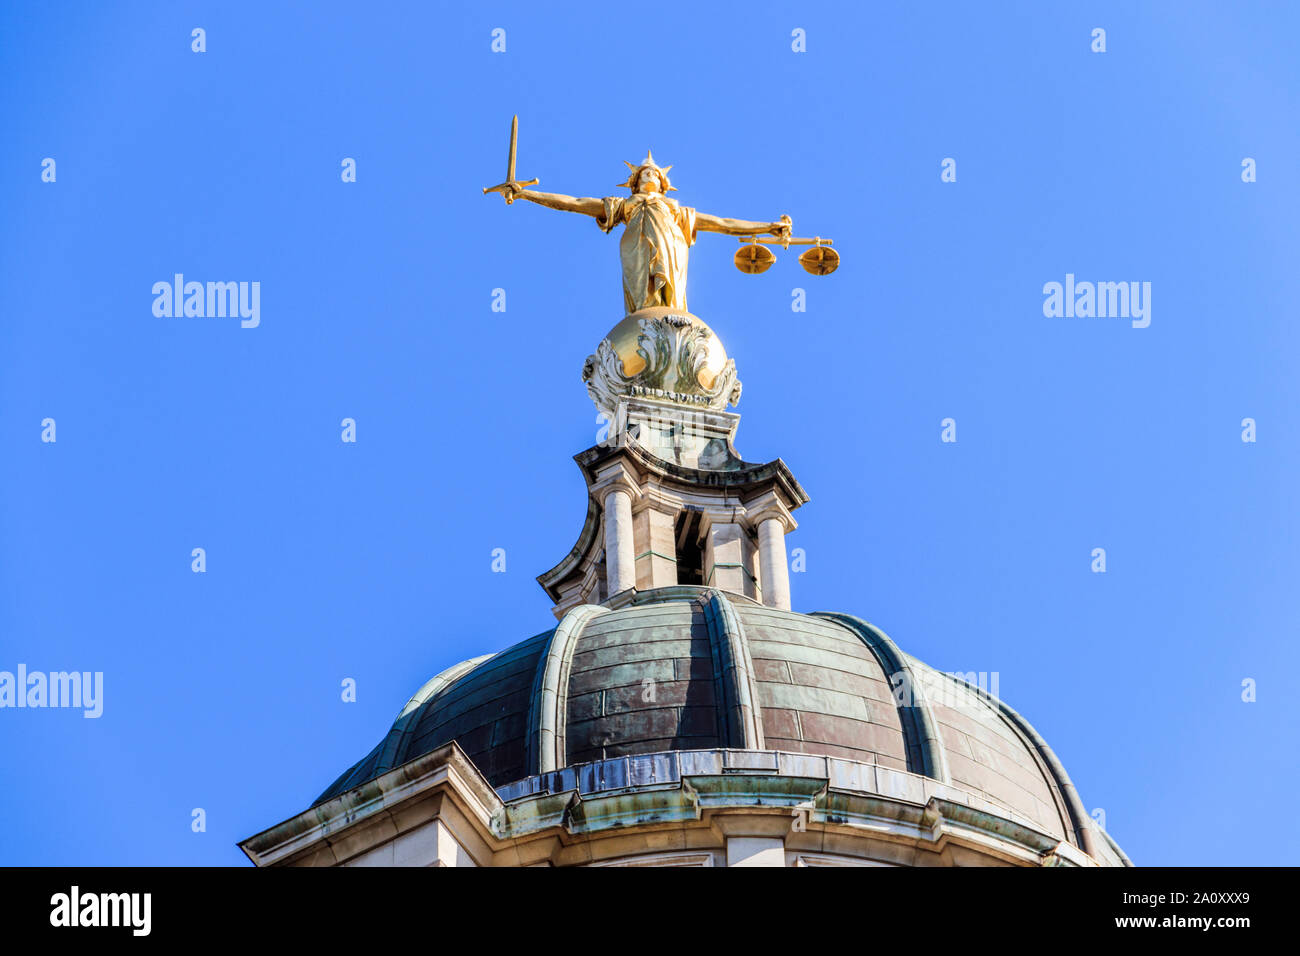 Statue of Lady Justice by the British sculptor F. W. Pomeroy on the dome of the Central Criminal Court, Old Bailey, London EC4, UK Stock Photo